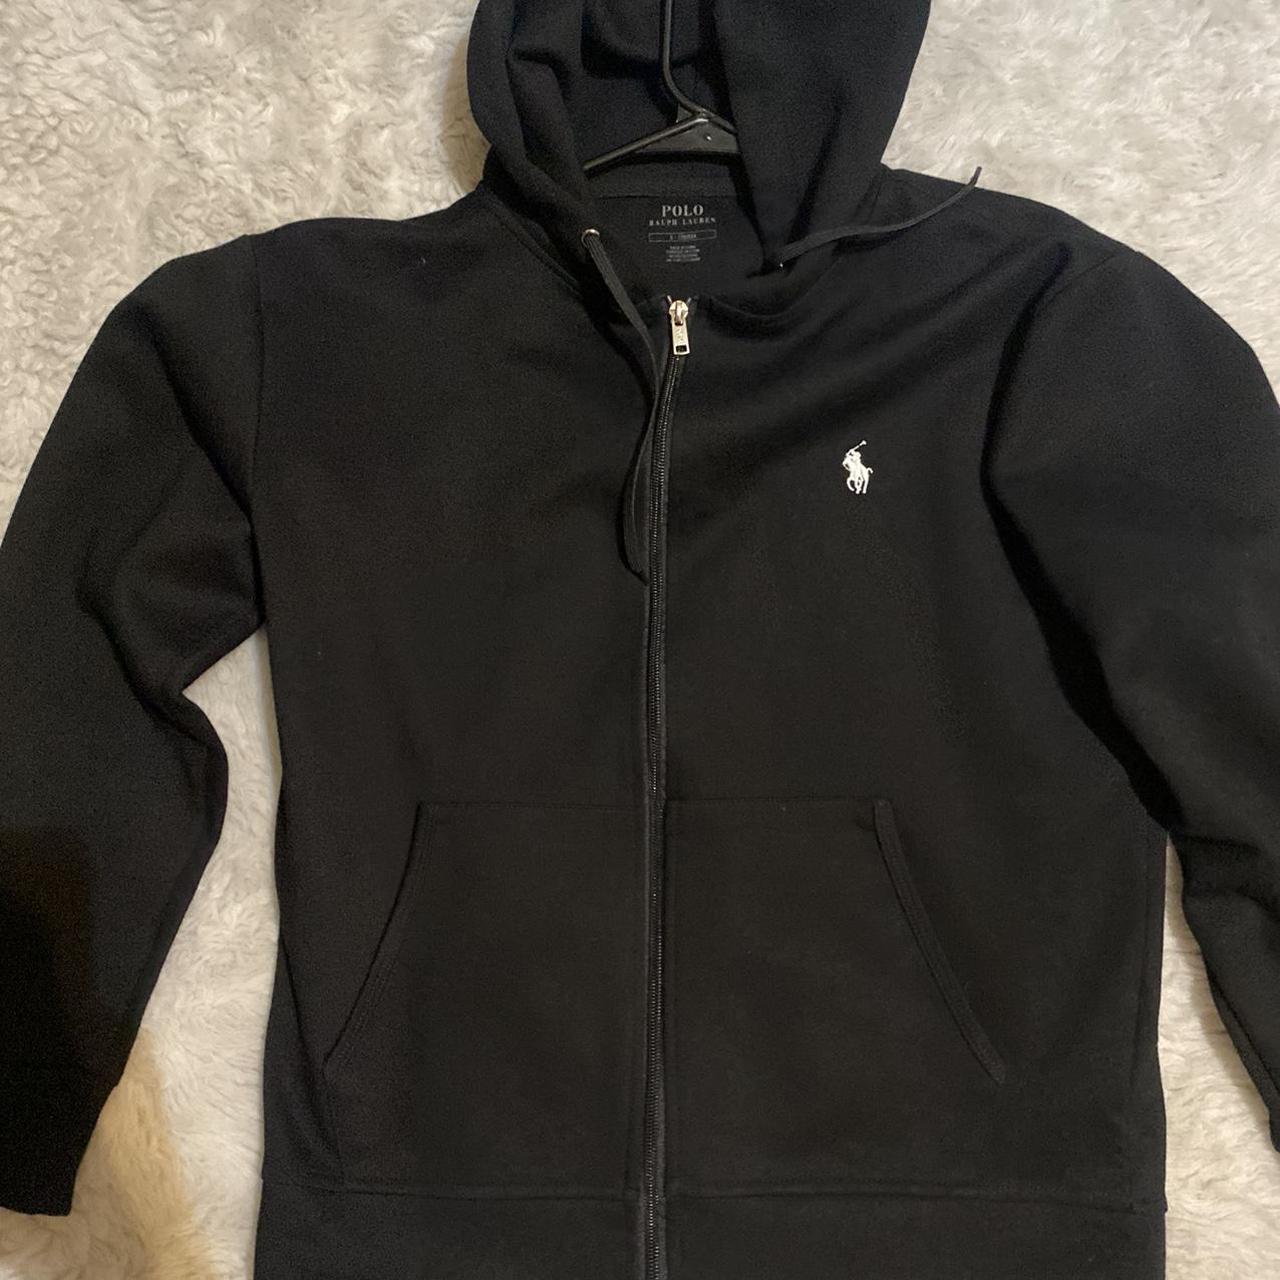 polo tech zip up size small - Depop